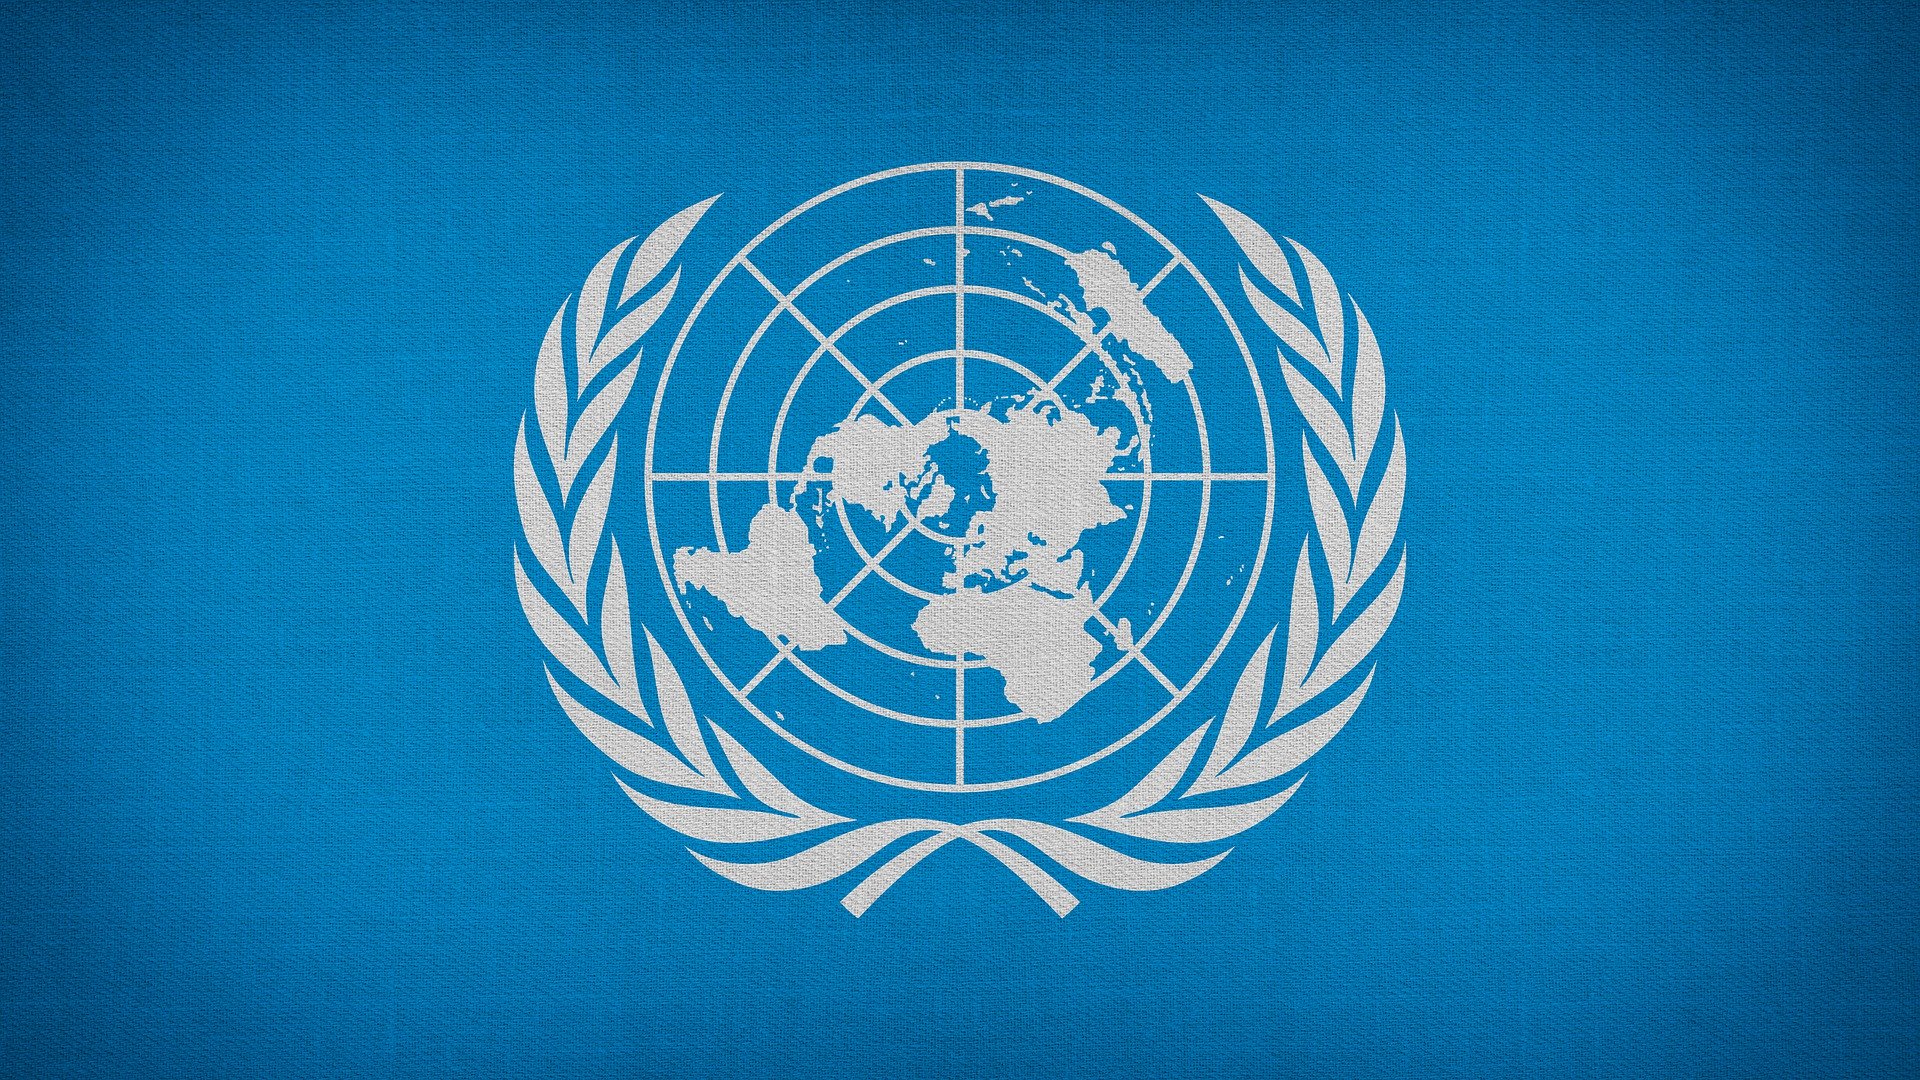 nations unies